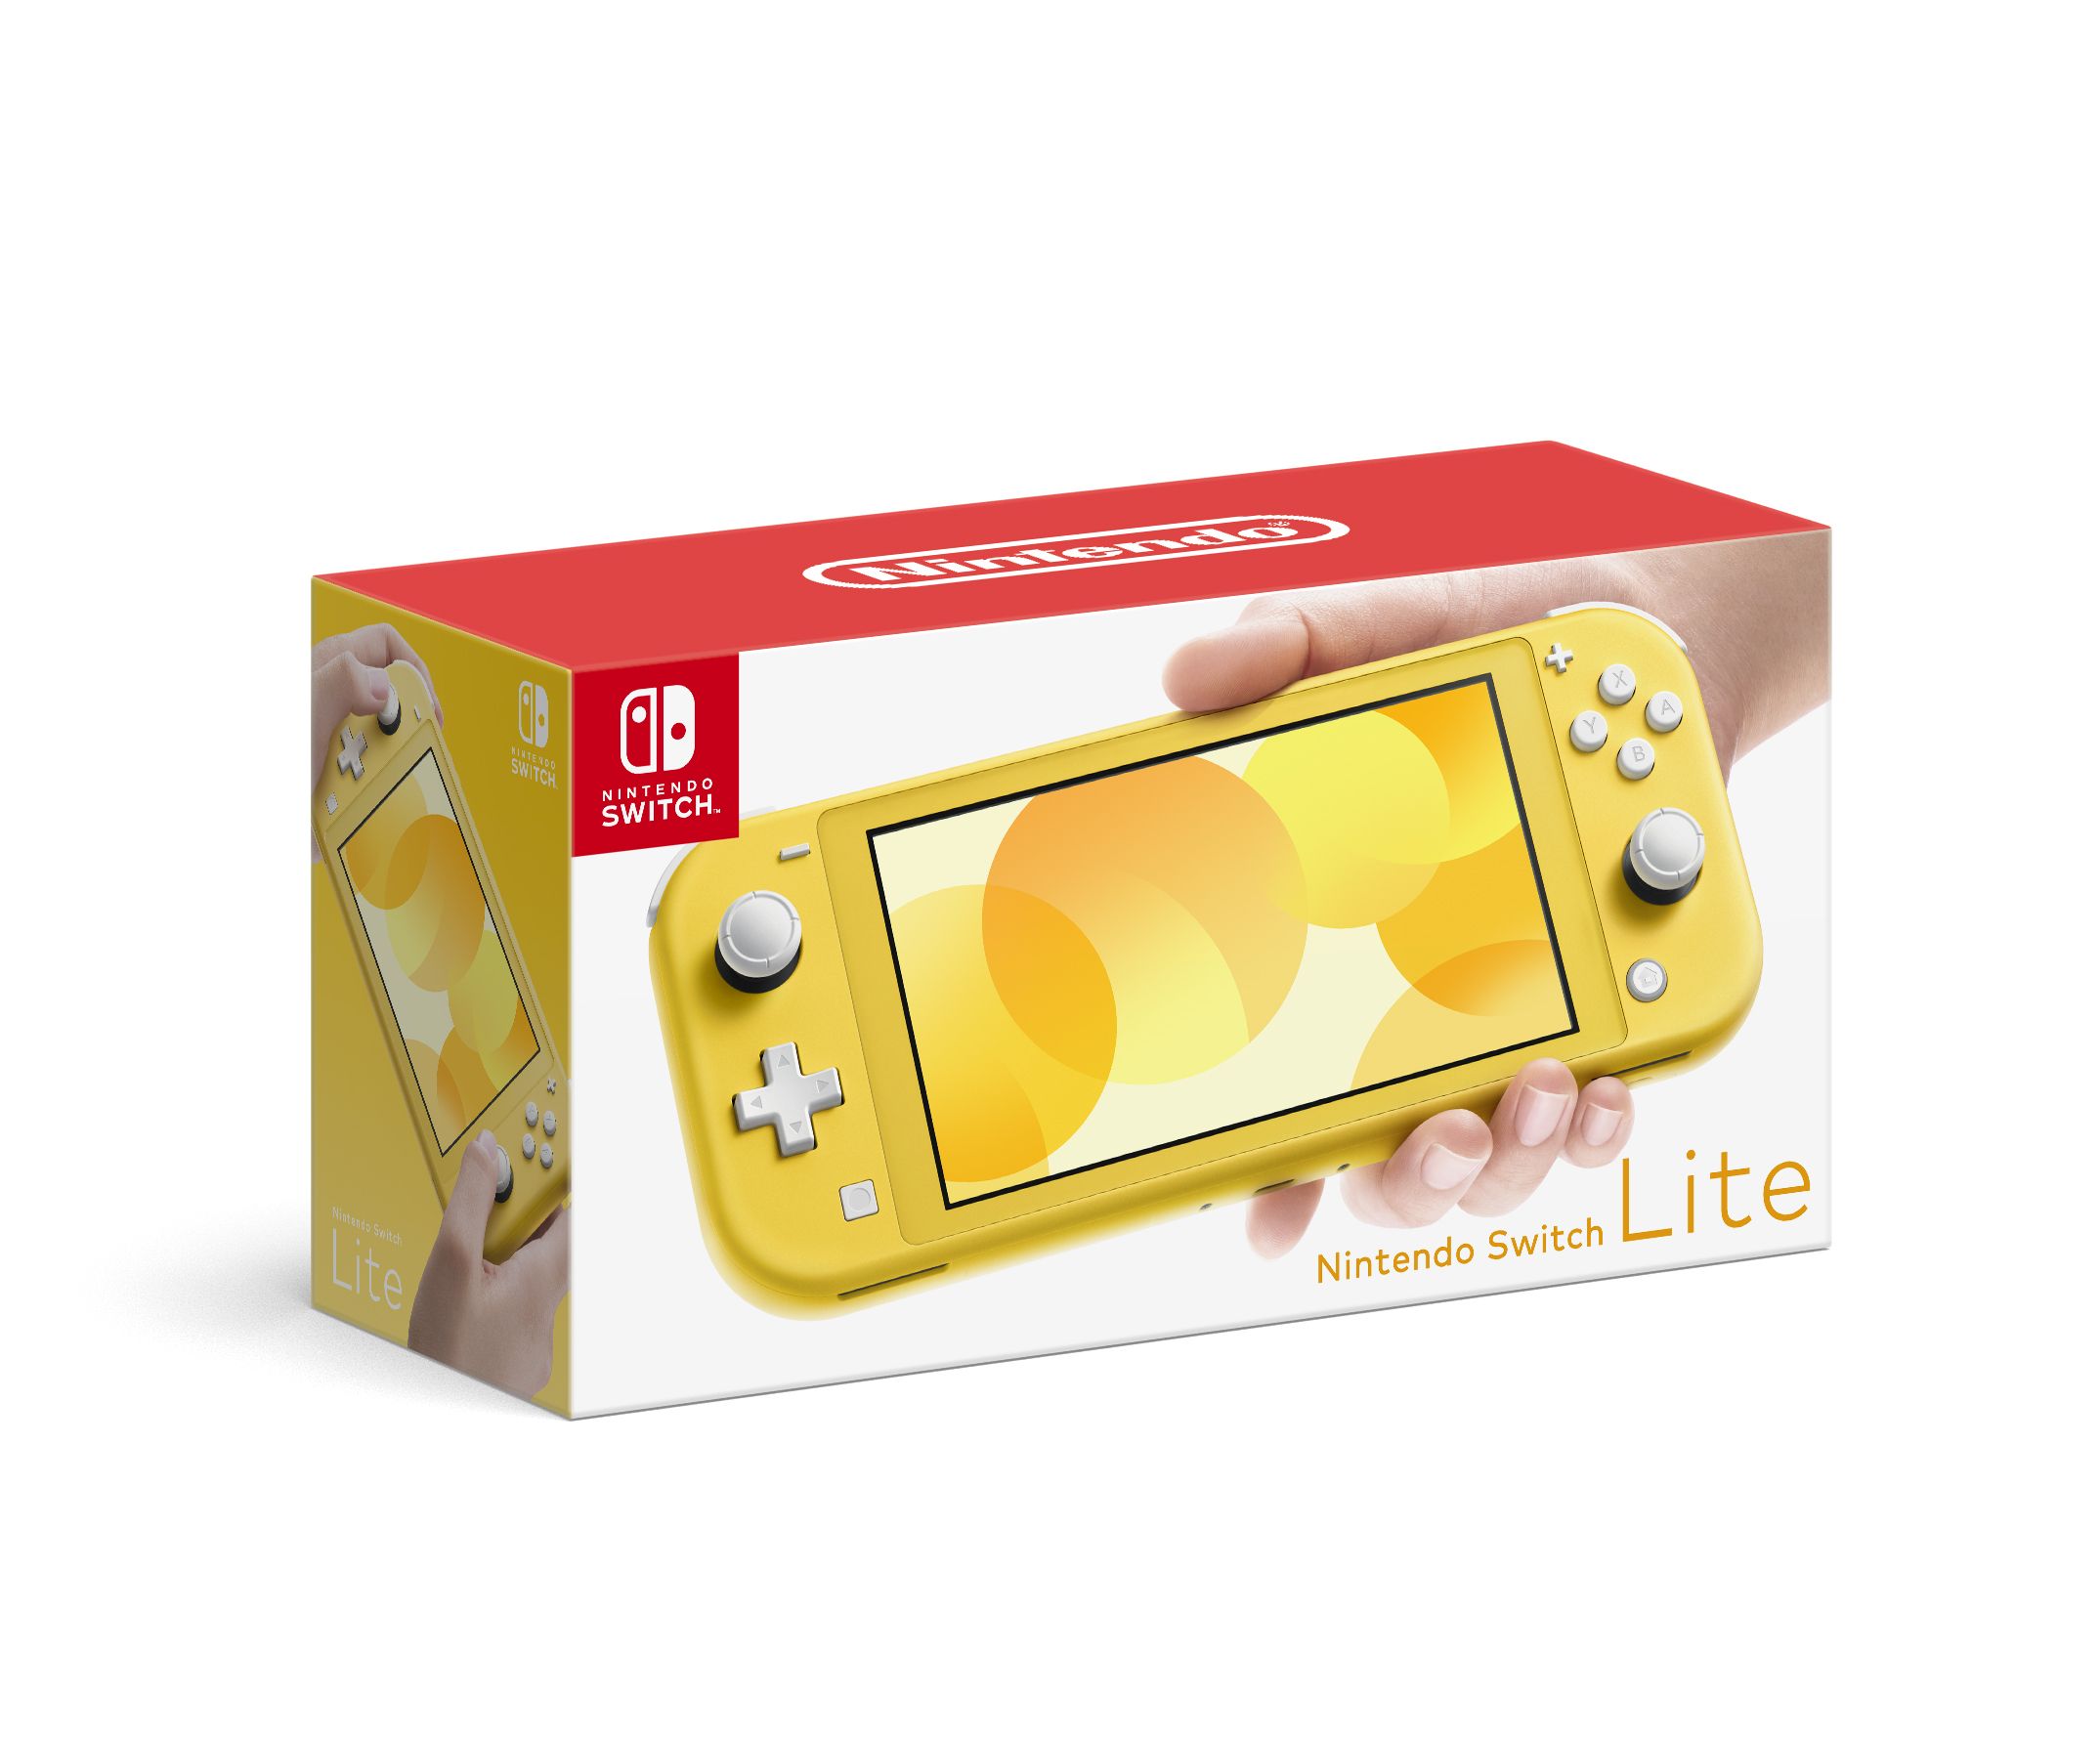 Nintendo Switch Lite announced, launches September 20 for $199 - Gematsu